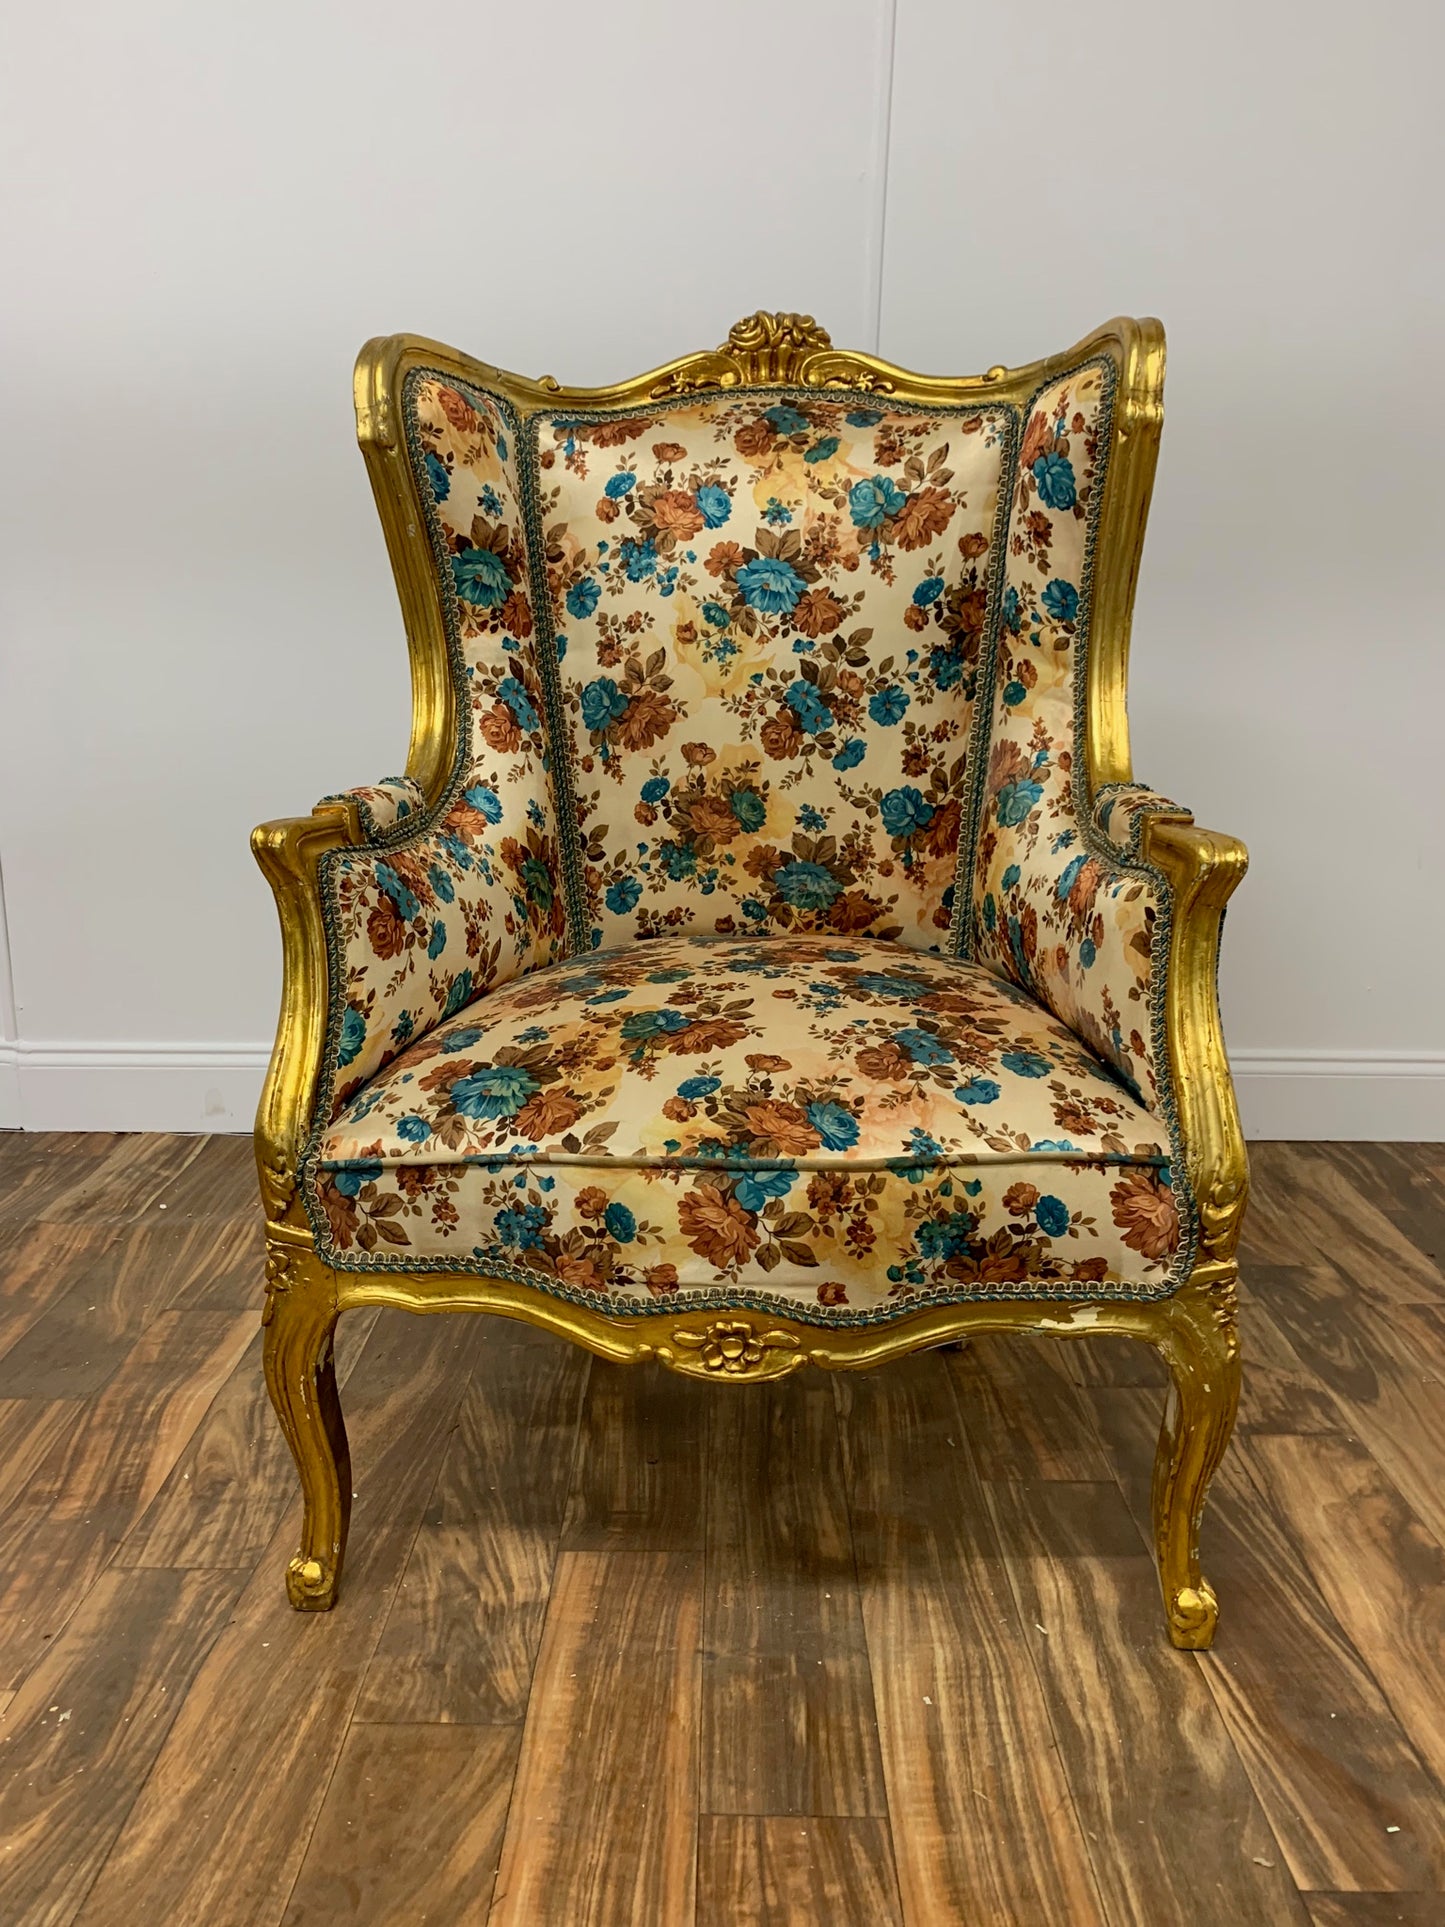 ORNATE FLORAL PATTERN WINGBACK CHAIR